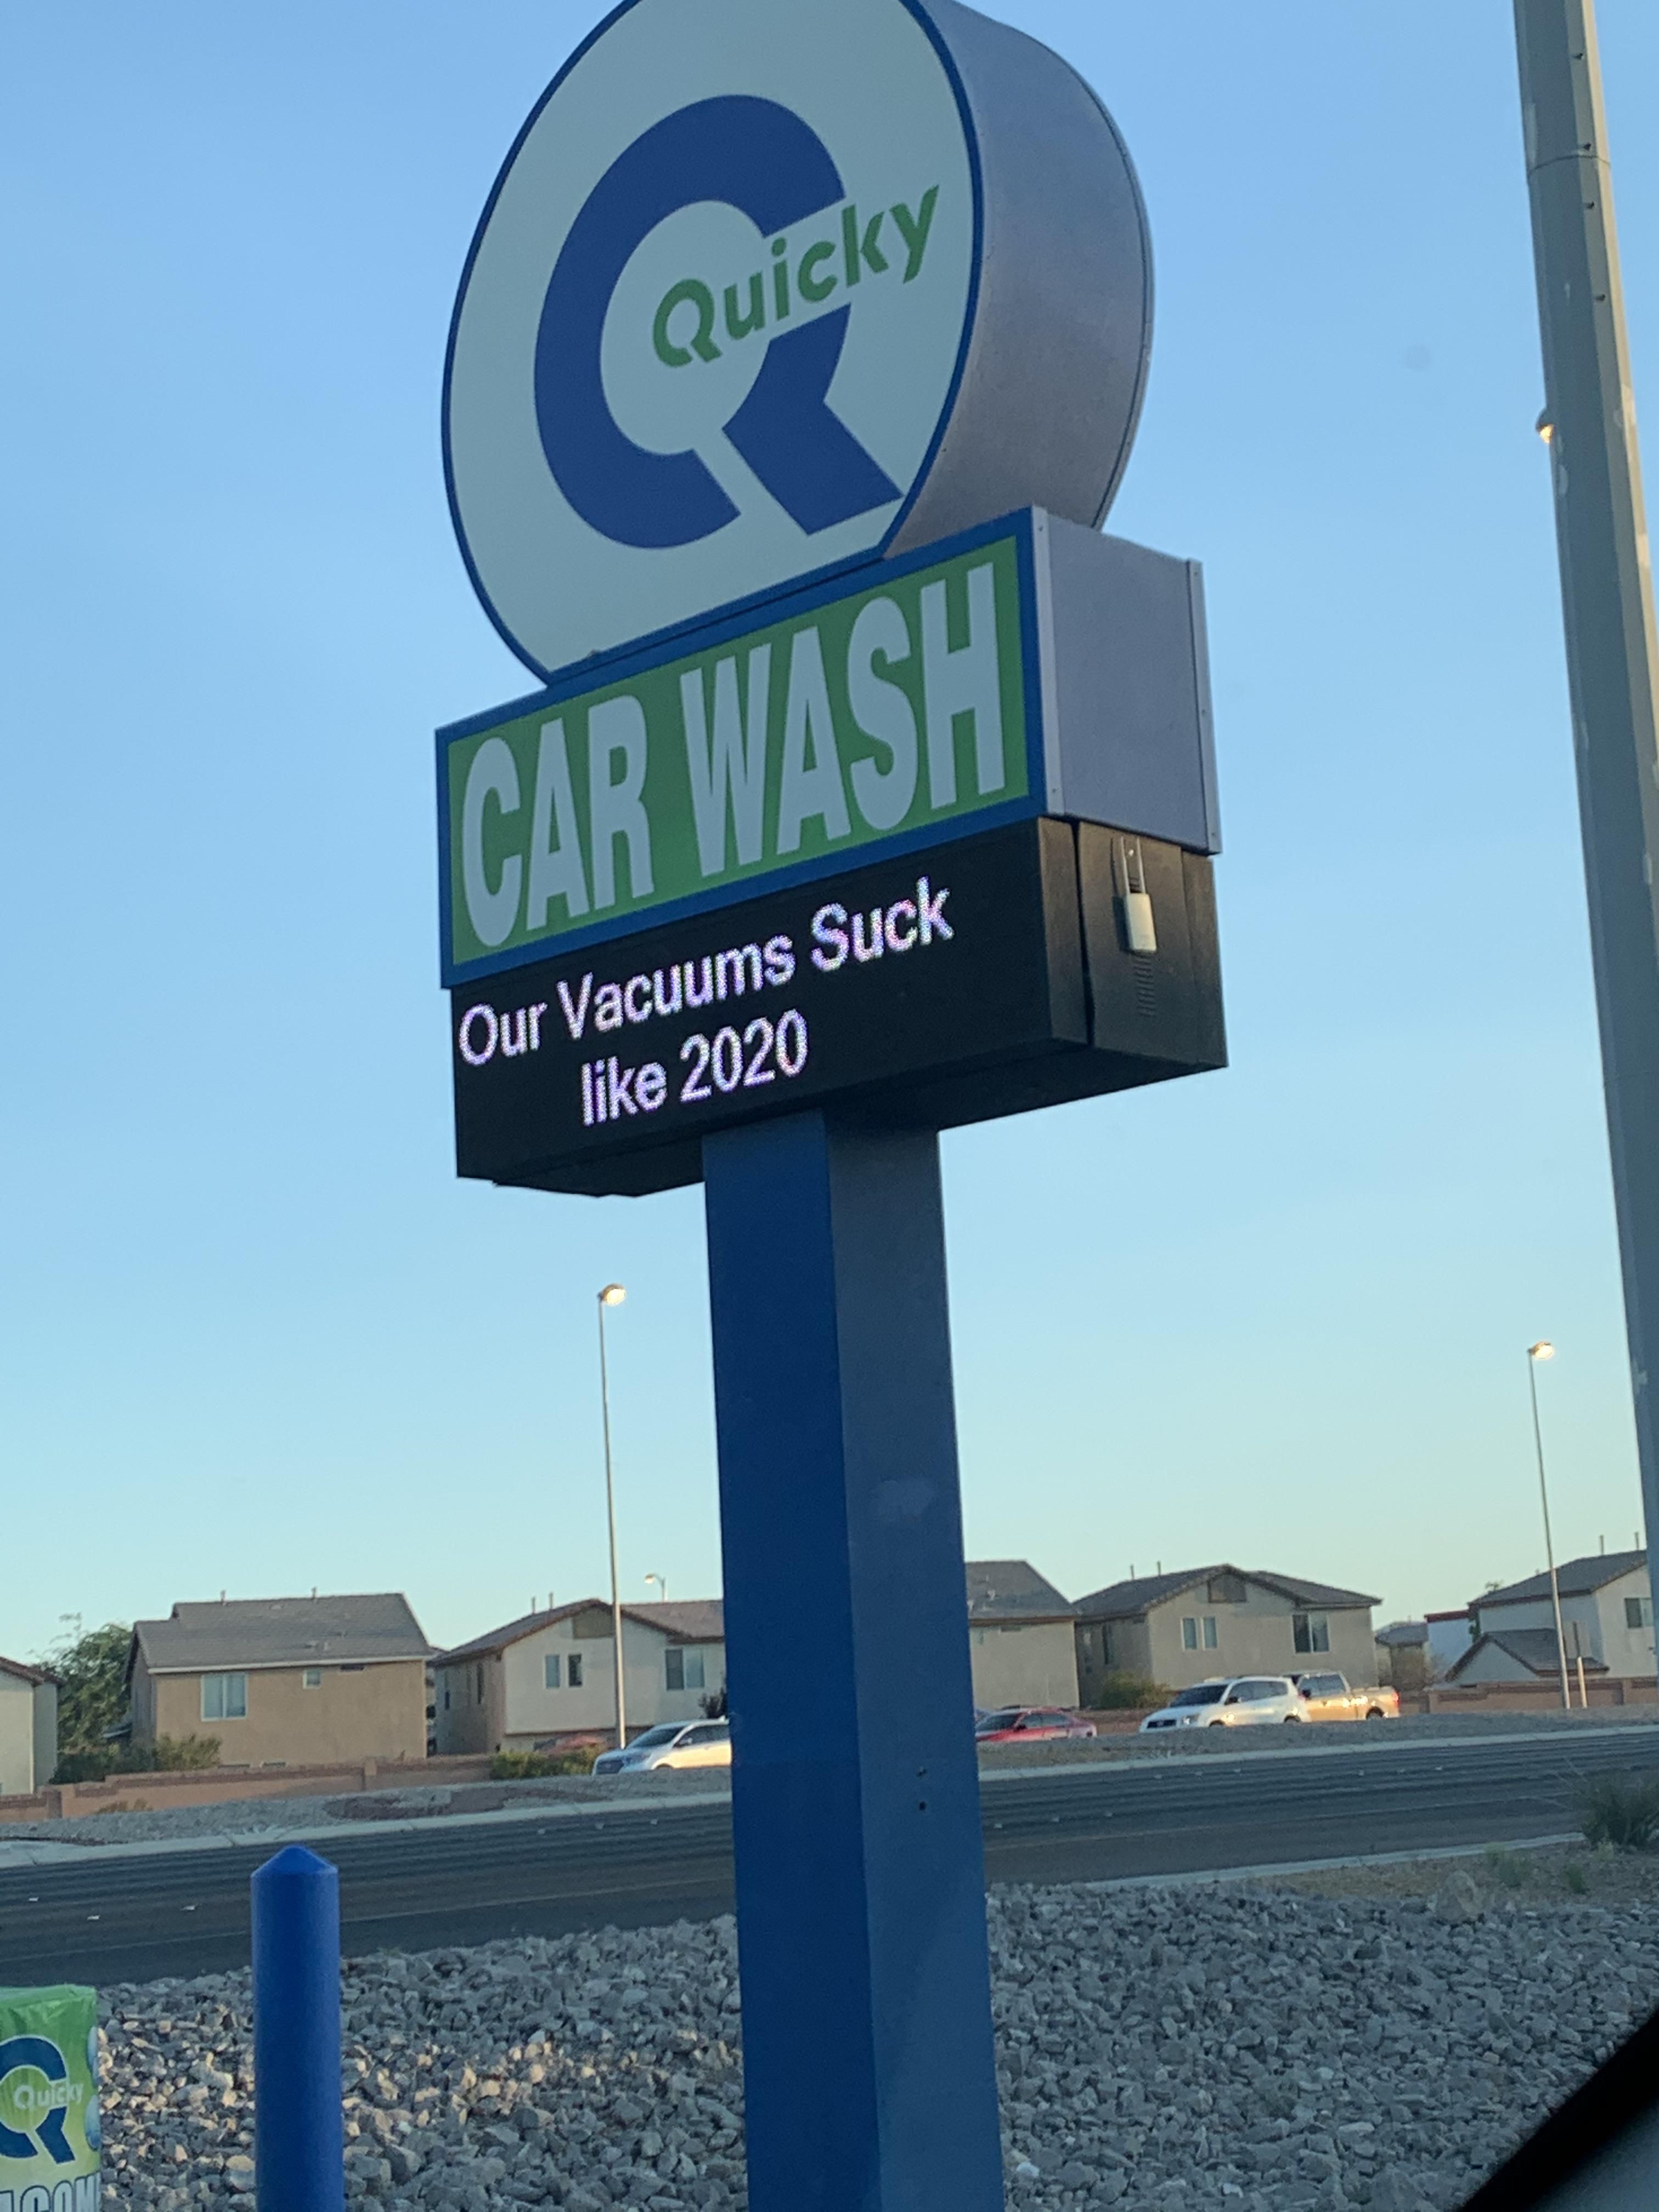 Went to get a car wash, some great advertising